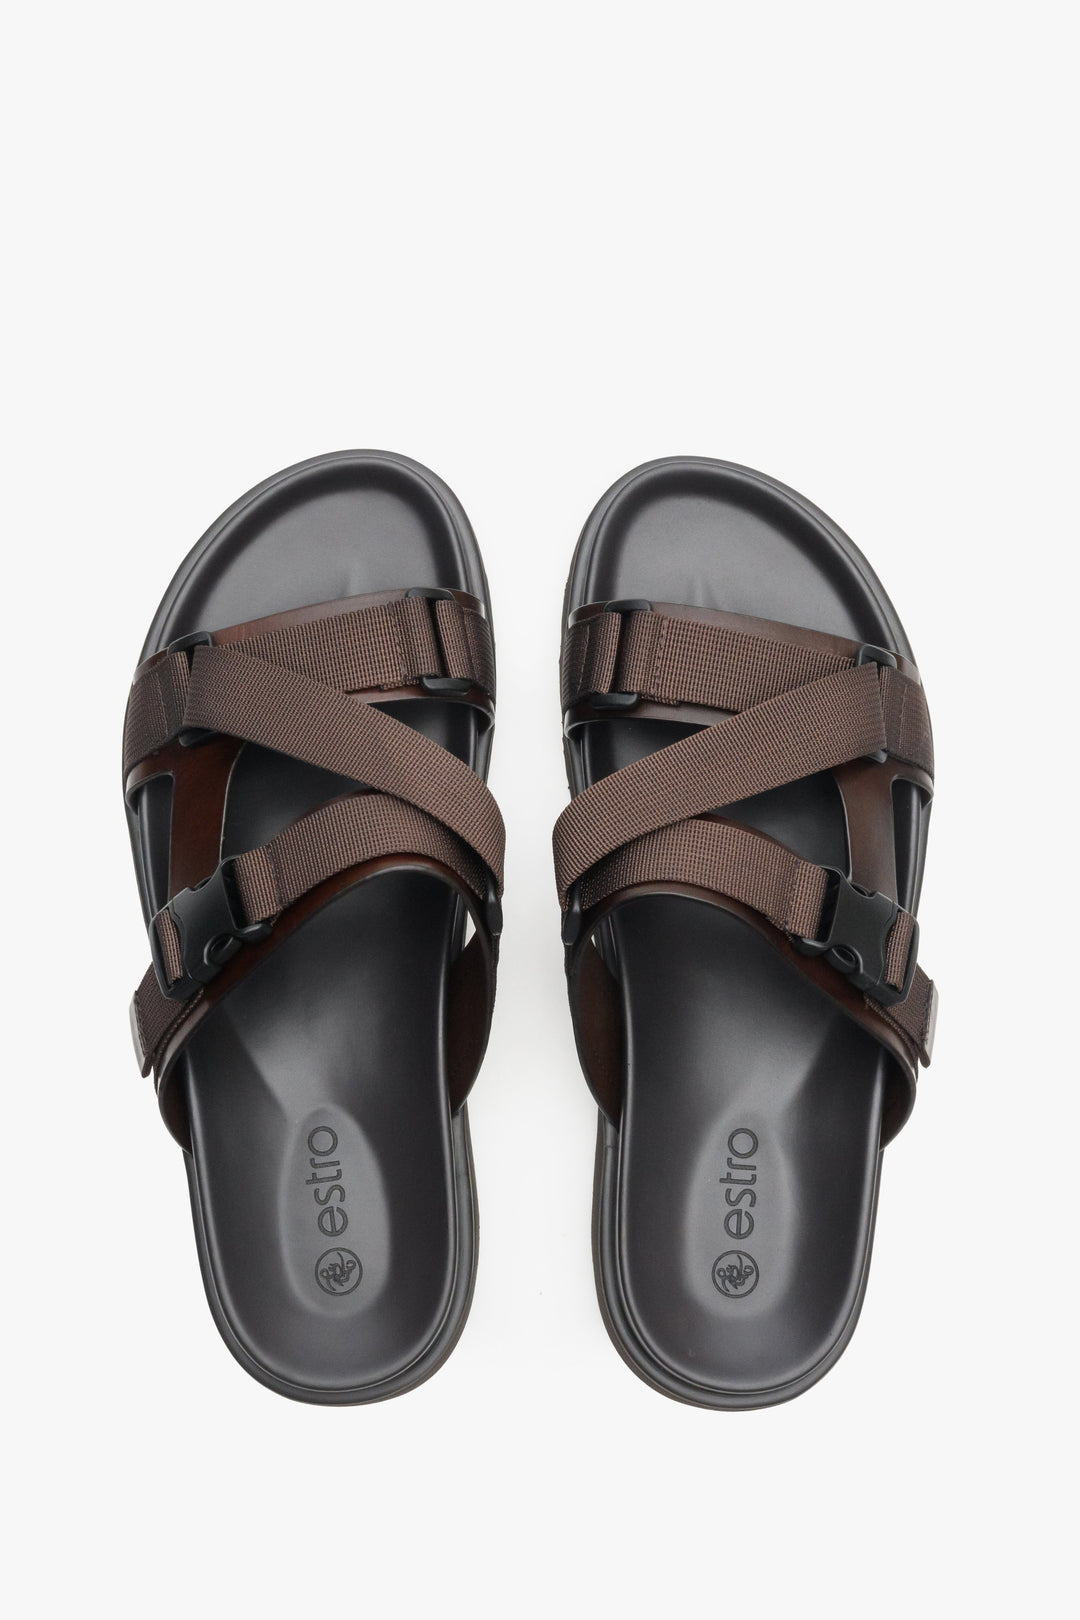 Men's dark brown Estro leather slides made of genuine leather and textiles - top view presentation.